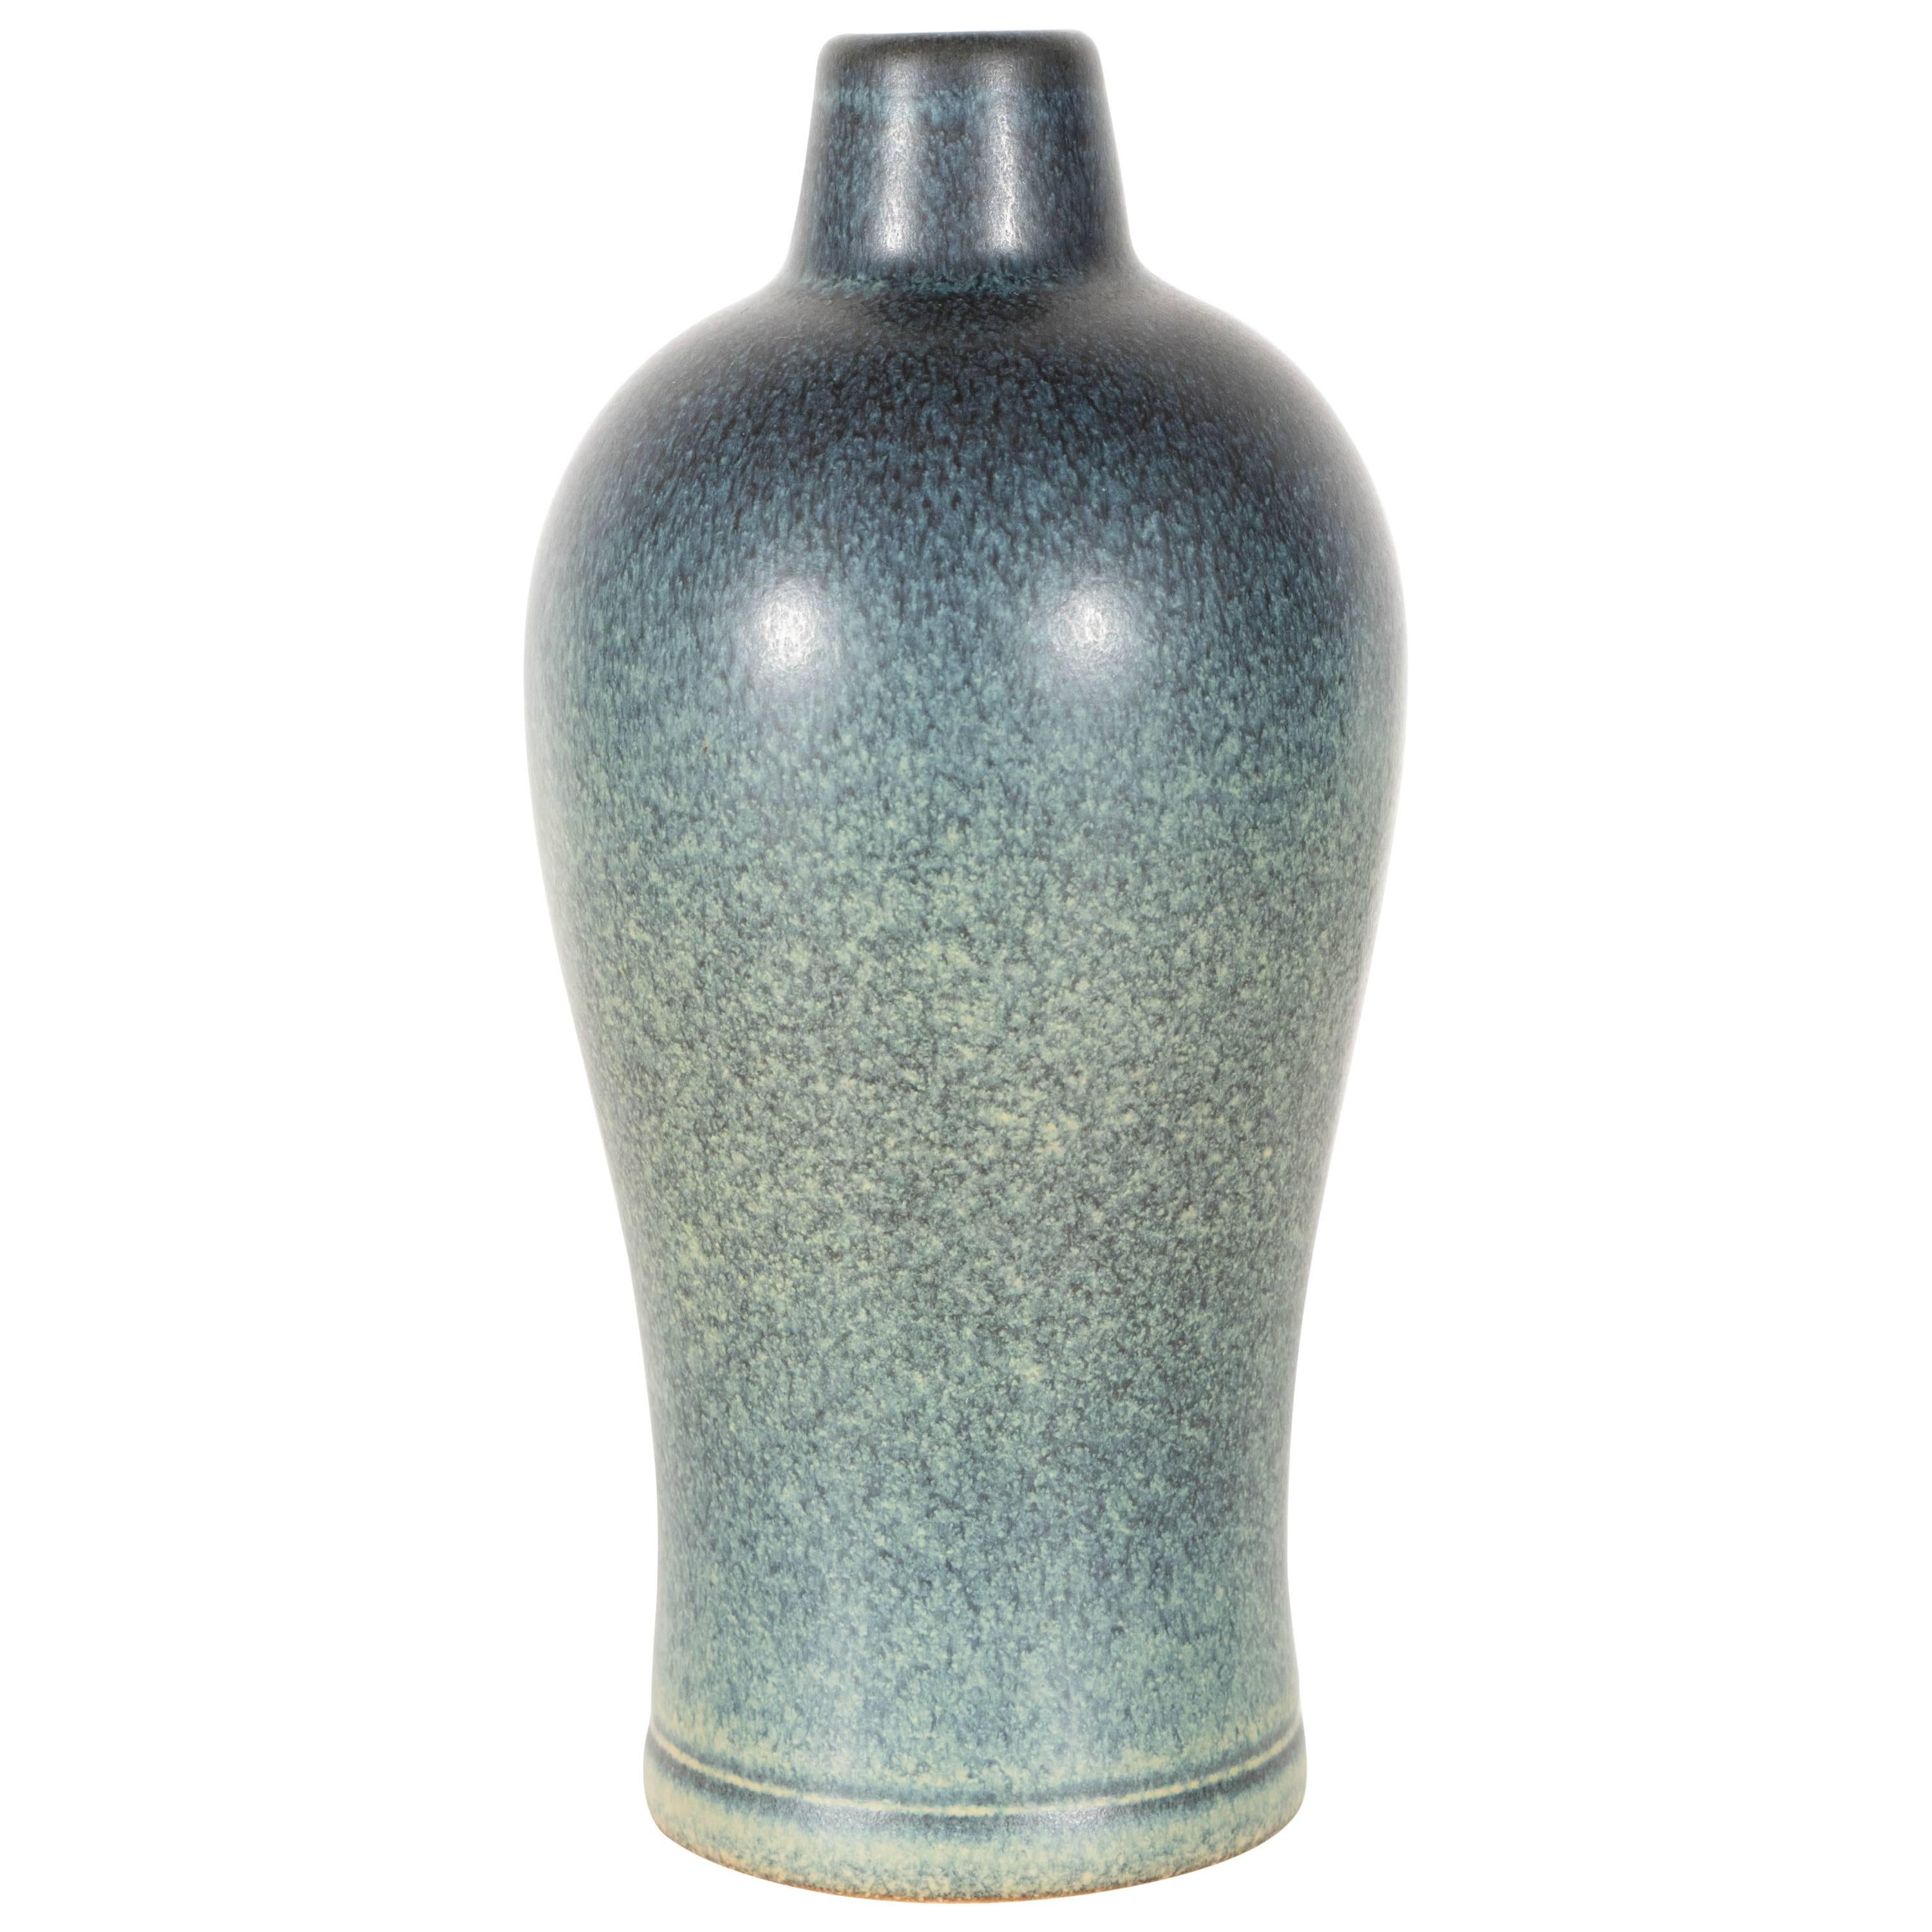 Gorgeous Mid-Century Modernist Vase by Gunnar Nylund for Rörstrand